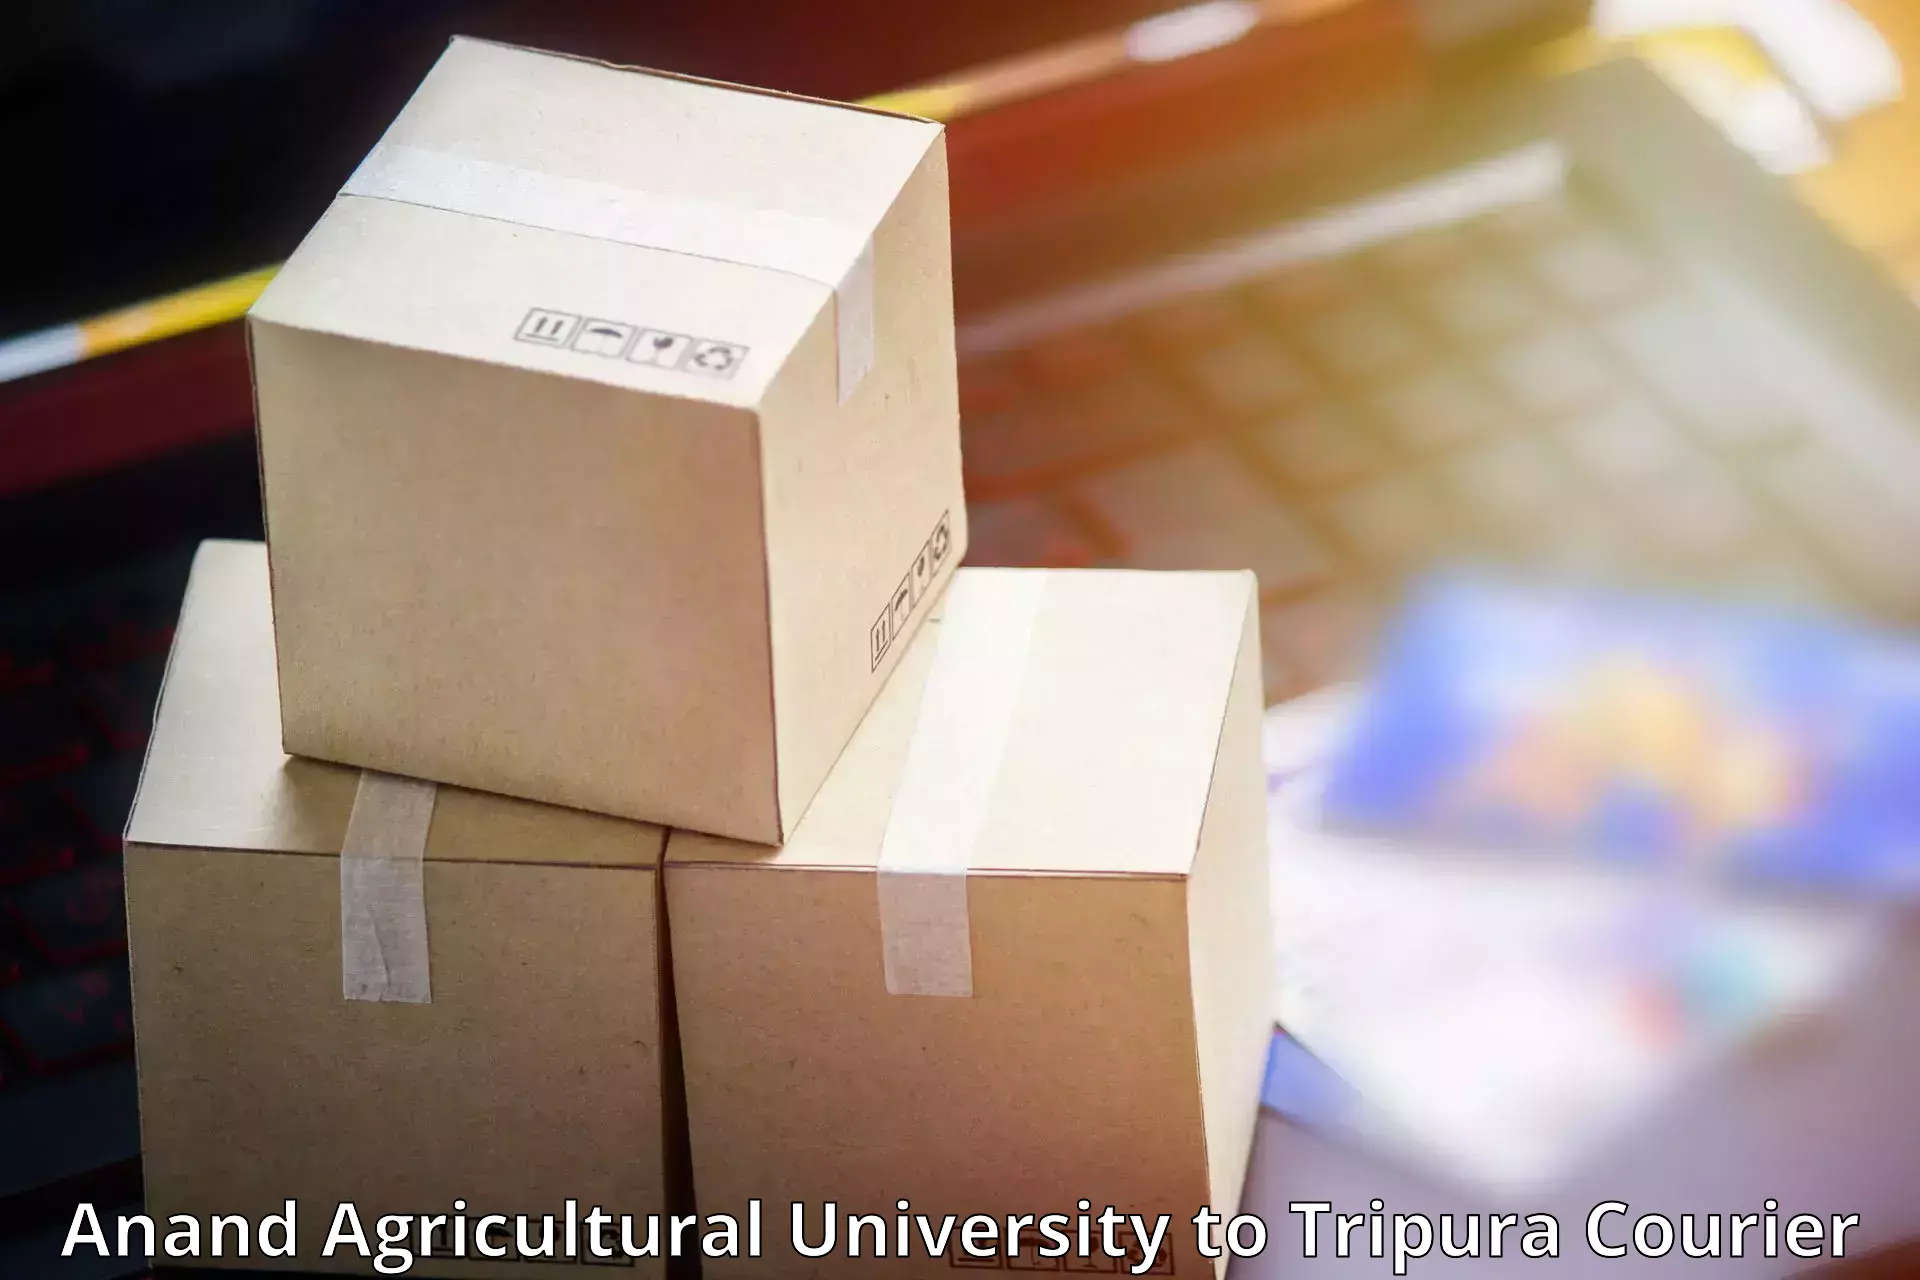 Heavy parcel delivery in Anand Agricultural University to Udaipur Tripura